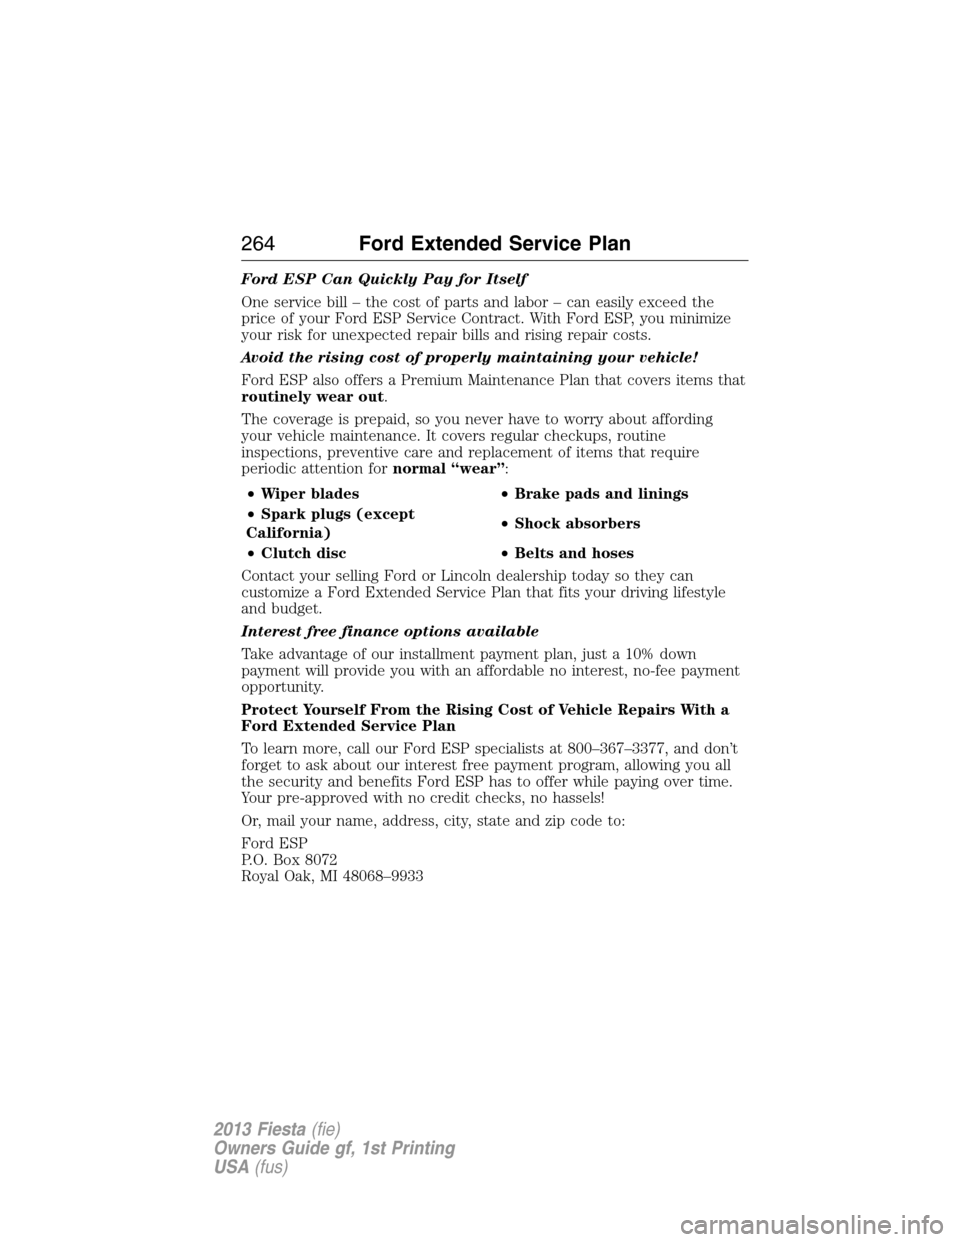 FORD FIESTA 2013 7.G Owners Manual Ford ESP Can Quickly Pay for Itself
One service bill – the cost of parts and labor – can easily exceed the
price of your Ford ESP Service Contract. With Ford ESP, you minimize
your risk for unexpe